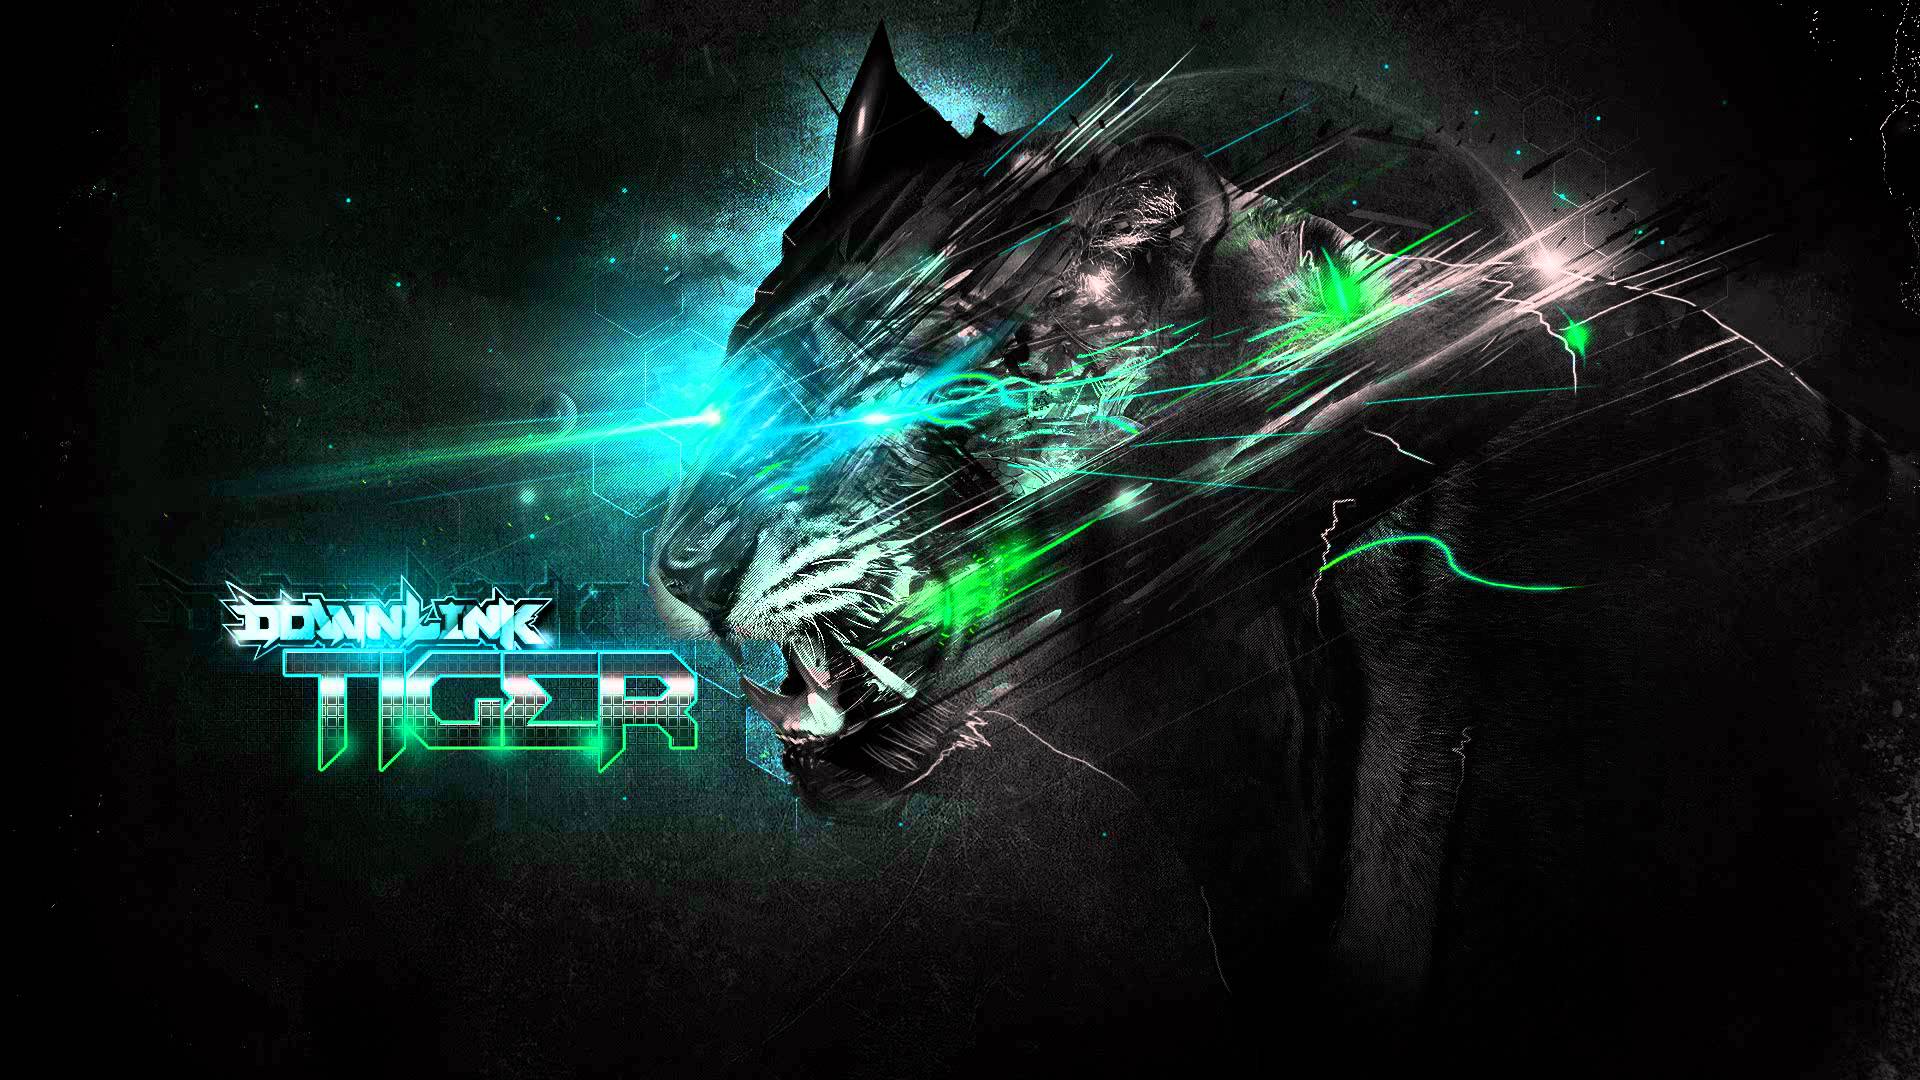 Free download Excision Wallpapers Hd Maxresdefaultjpg 1920x1080.